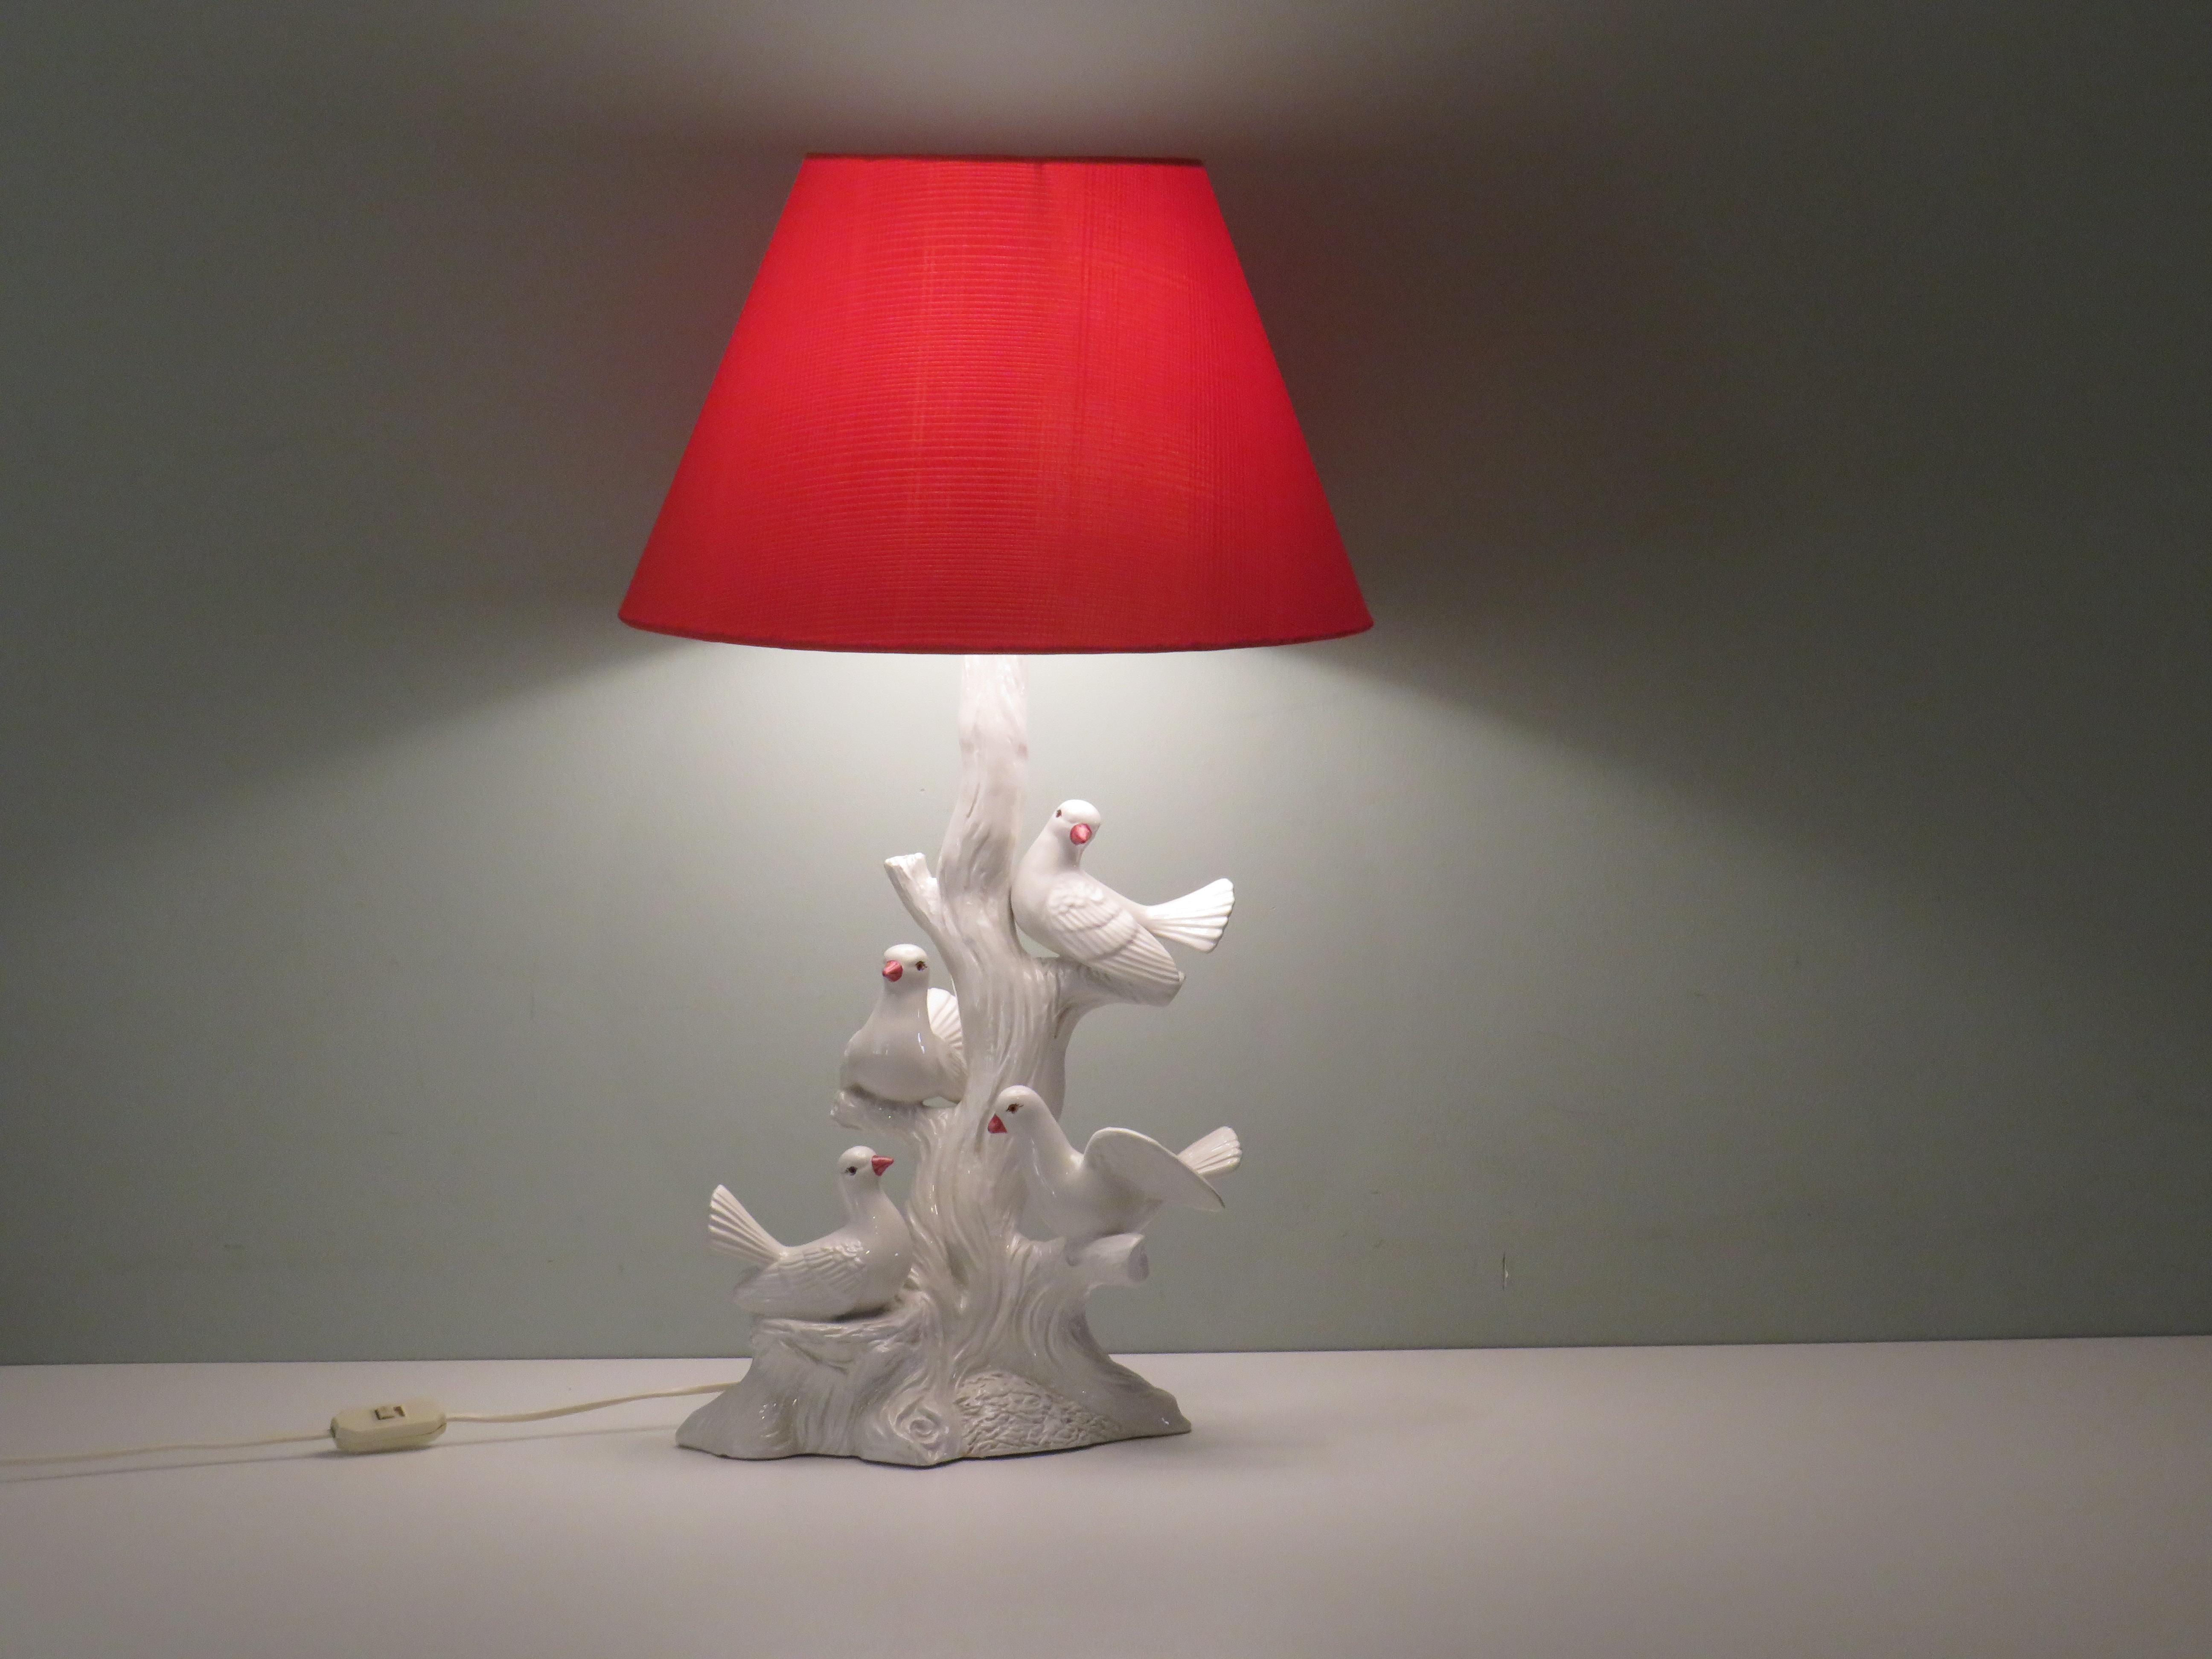 The lamp has a white glazed ceramic base with 4 doves on a branch and is fitted with a custom tangerine silky lampshade. It is equipped with an E 27 fitting and white cord with an on and off button.
The height of the lamp base is 46 cm, the width